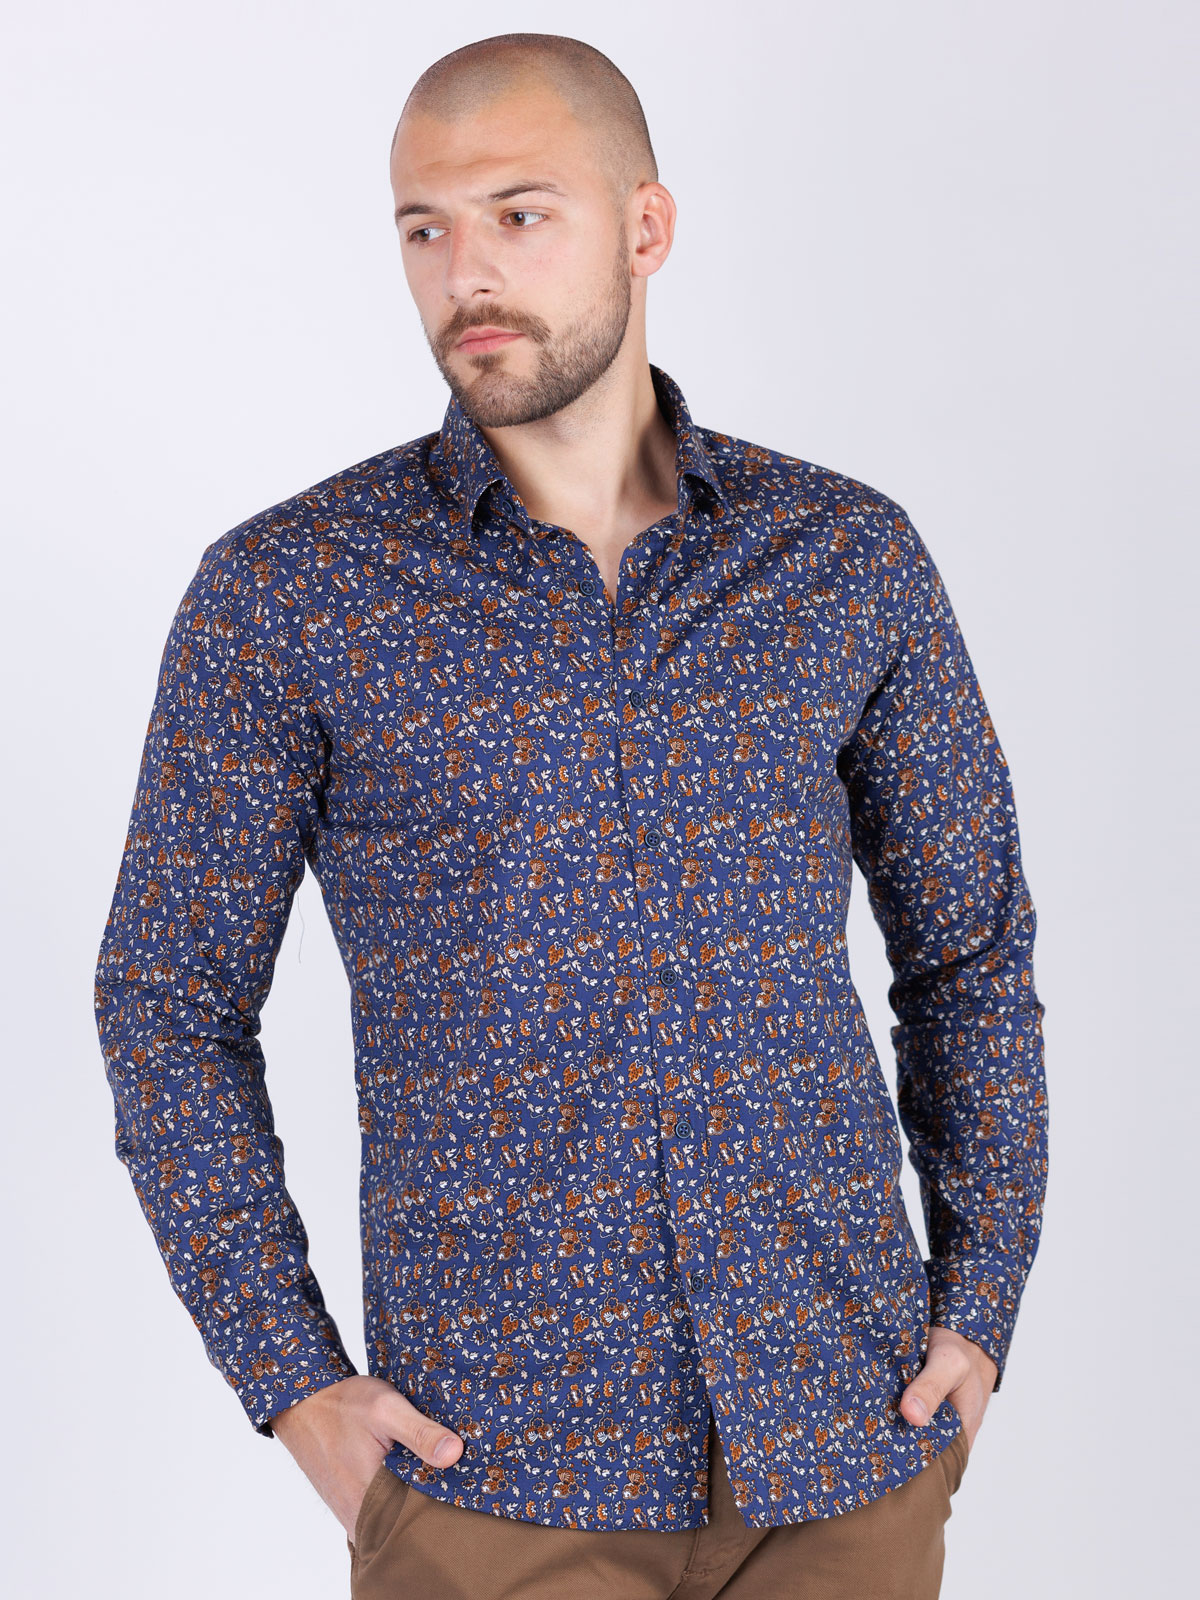 Shirt in dark blue with leaves - 21548 € 43.87 img4